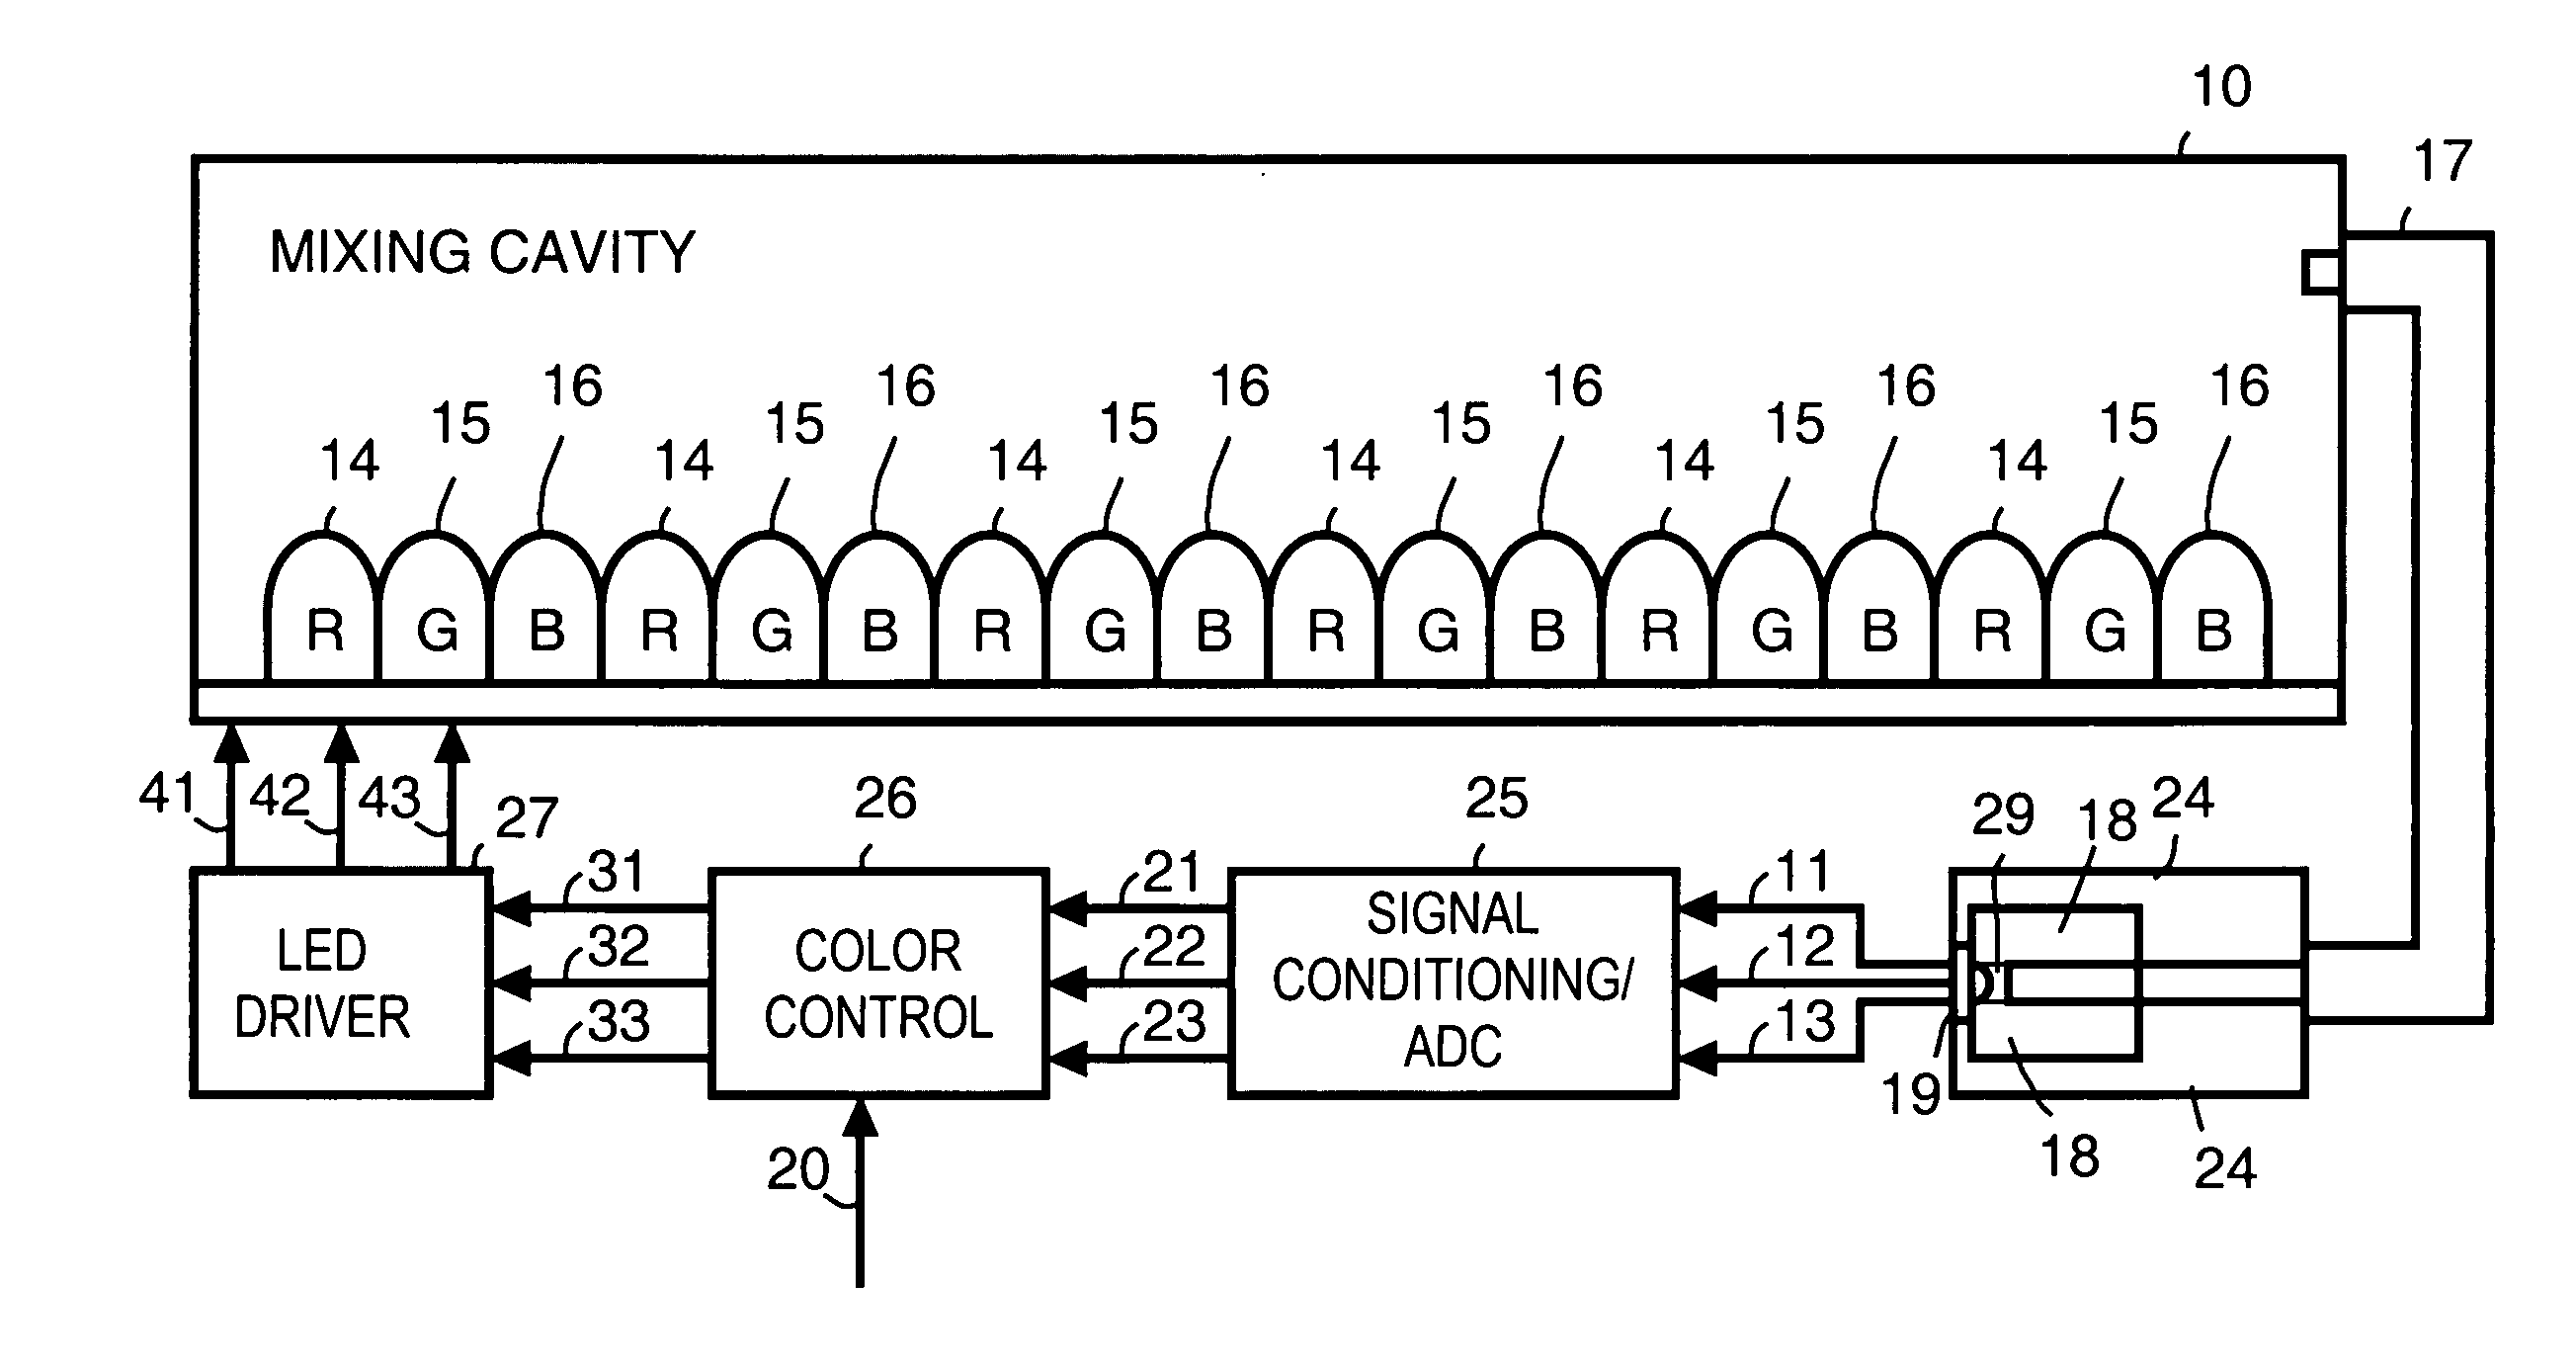 Sampling for color control feedback using an optical cable